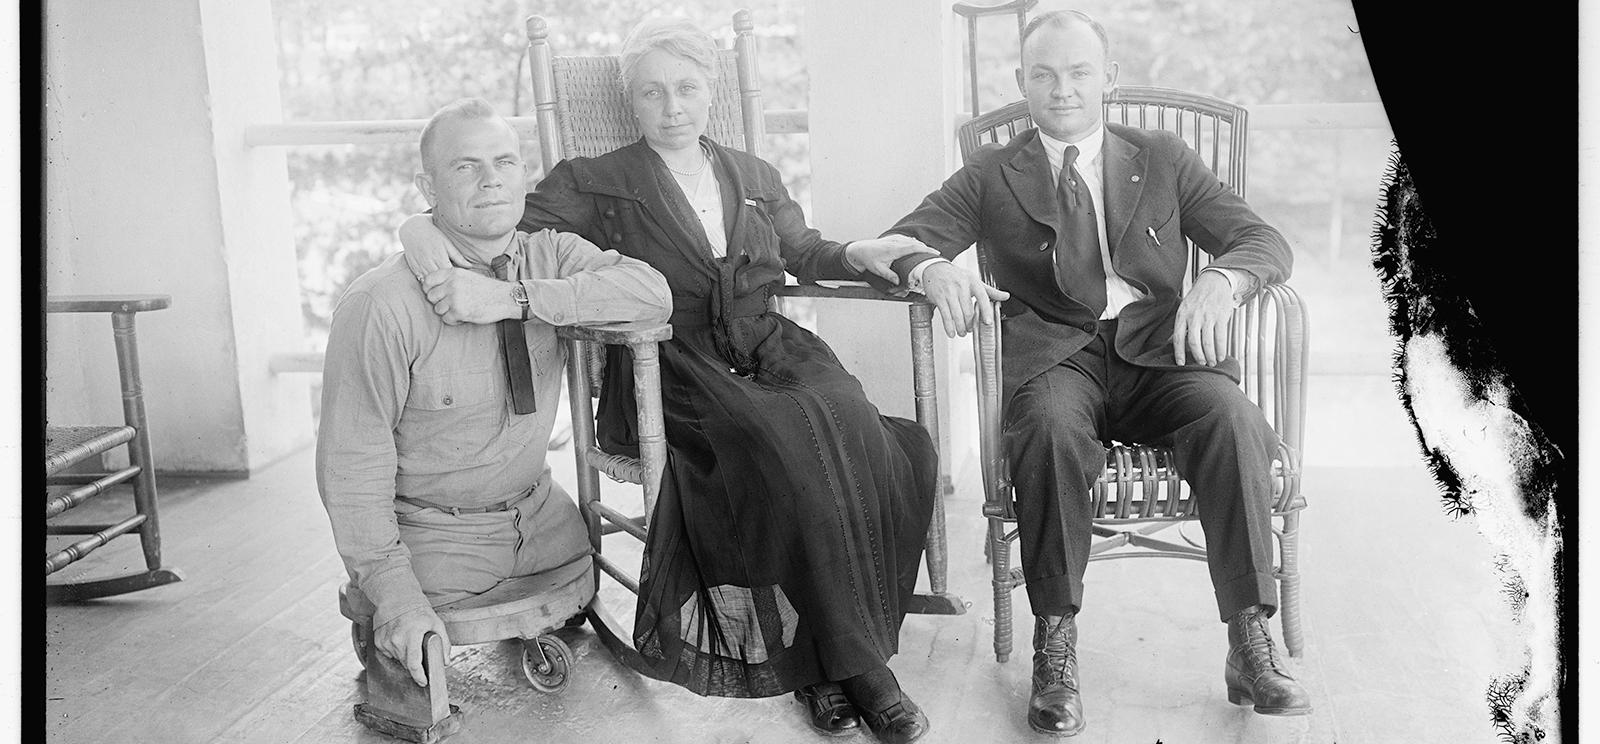 Black and white photo of three people posed for a group photo. Left to right: a white man in military uniform with both legs amputated nearly at the hip, resting on a small platform with wheels. A white woman in a dark-colored dress sitting in a rocking chair. A white man wearing a suit sitting in a rocking chair with a crutch leaning on a pillar behind him. The woman has her arm around the shoulders of the man on the left and her hand on the arm of the man on the right.